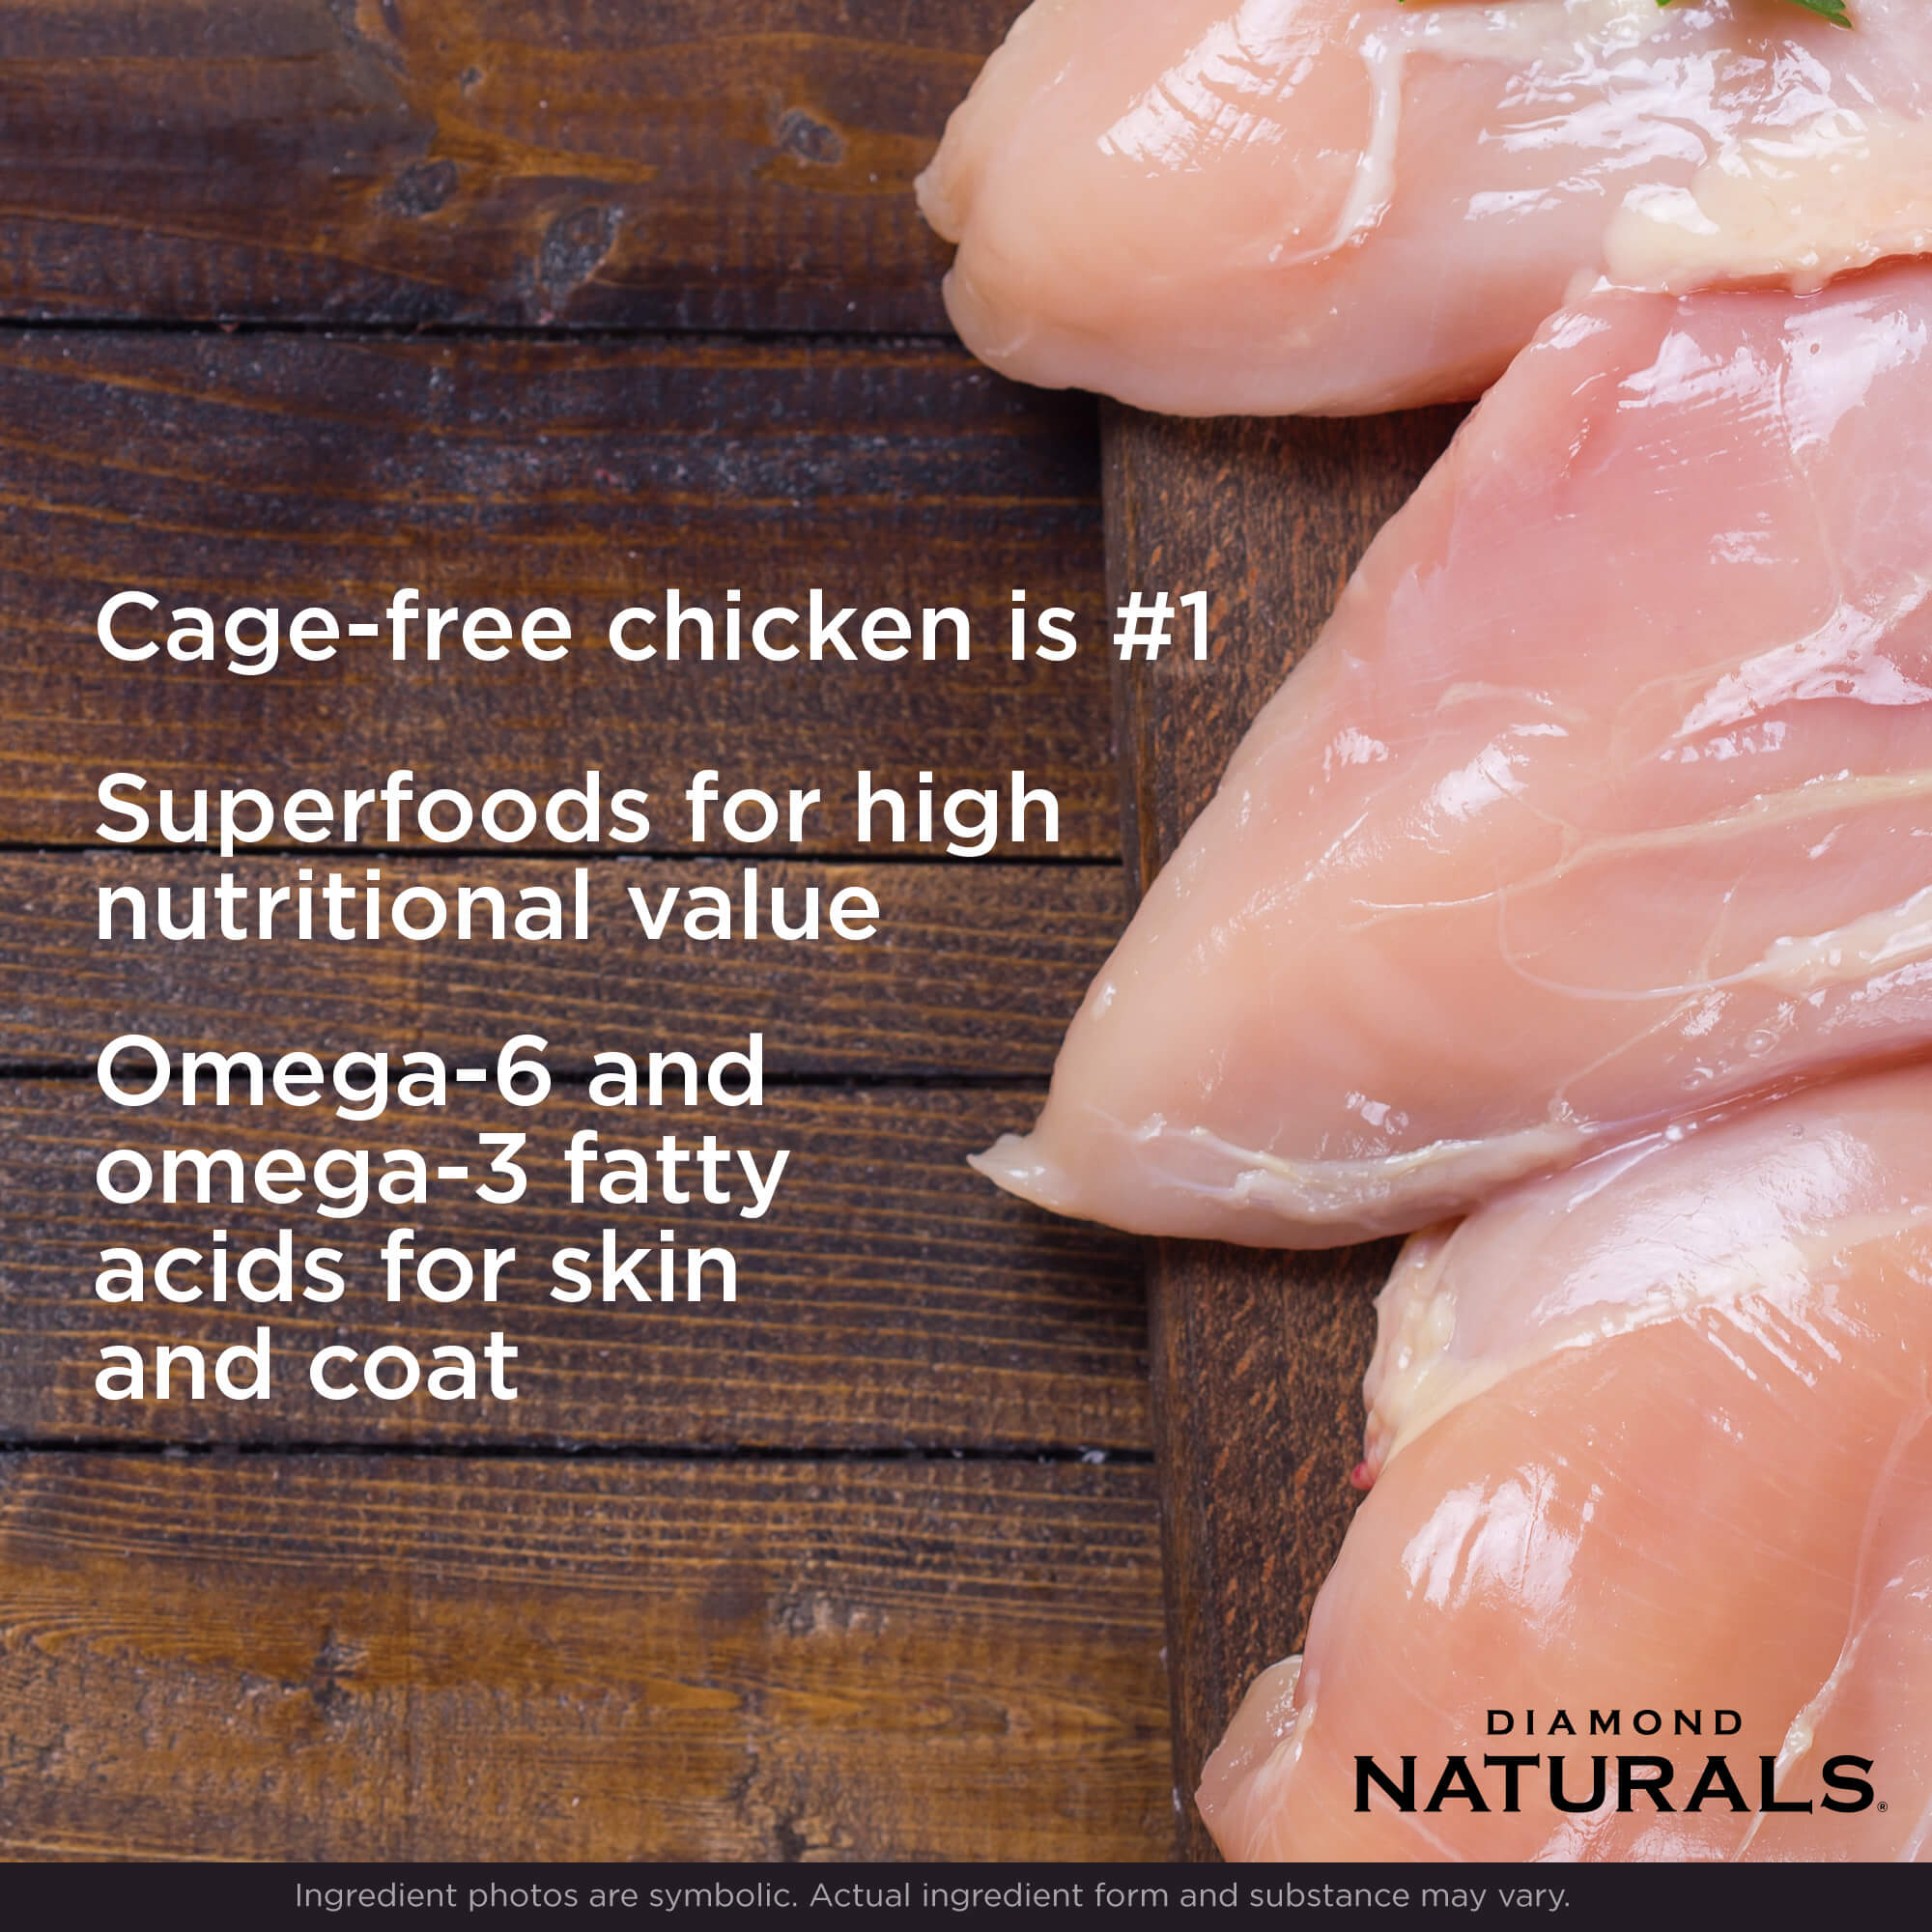 Cage-free chicken is #1